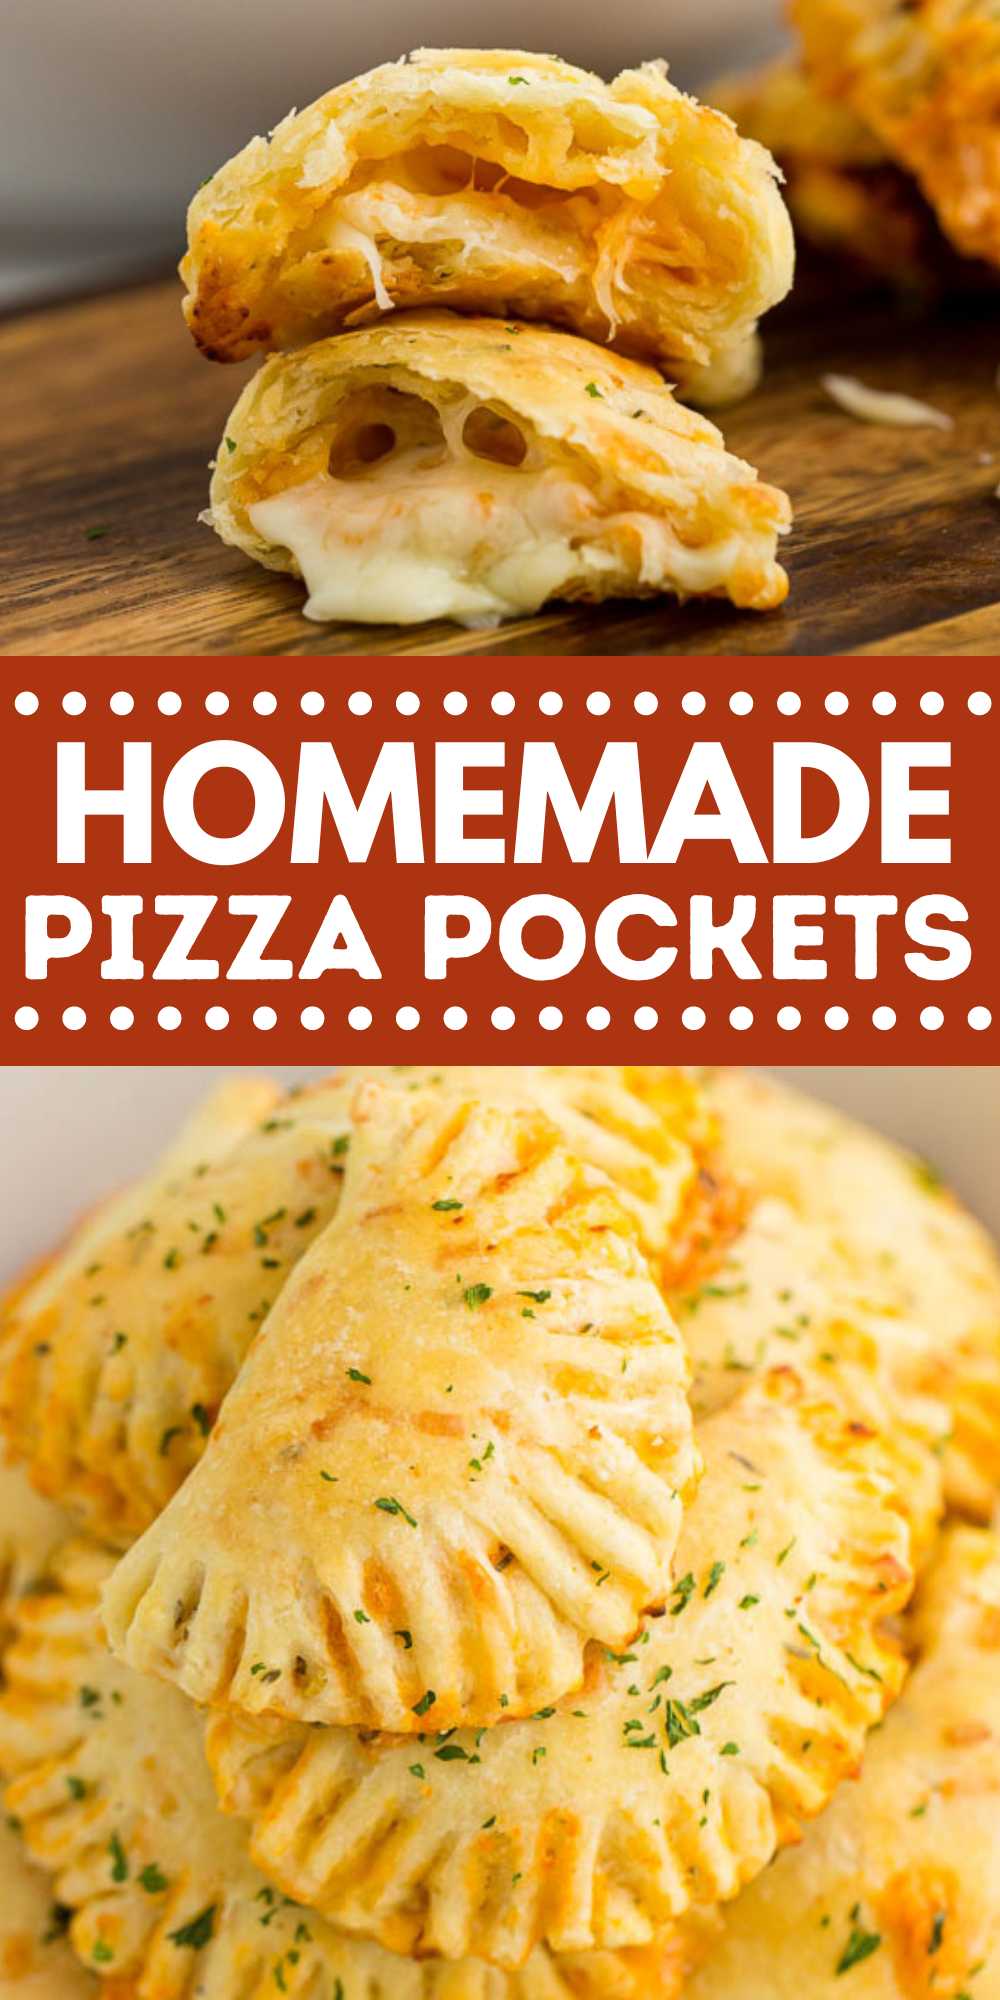 Pizza Pocket Recipe is so delicious and better than any of those store bought pizza snacks. Enjoy these anytime you want and make a batch for the freezer. They are the perfect snack, dinner idea or lunch on the go. #eatingonadime #pizzapockets #homemadepizzapockets